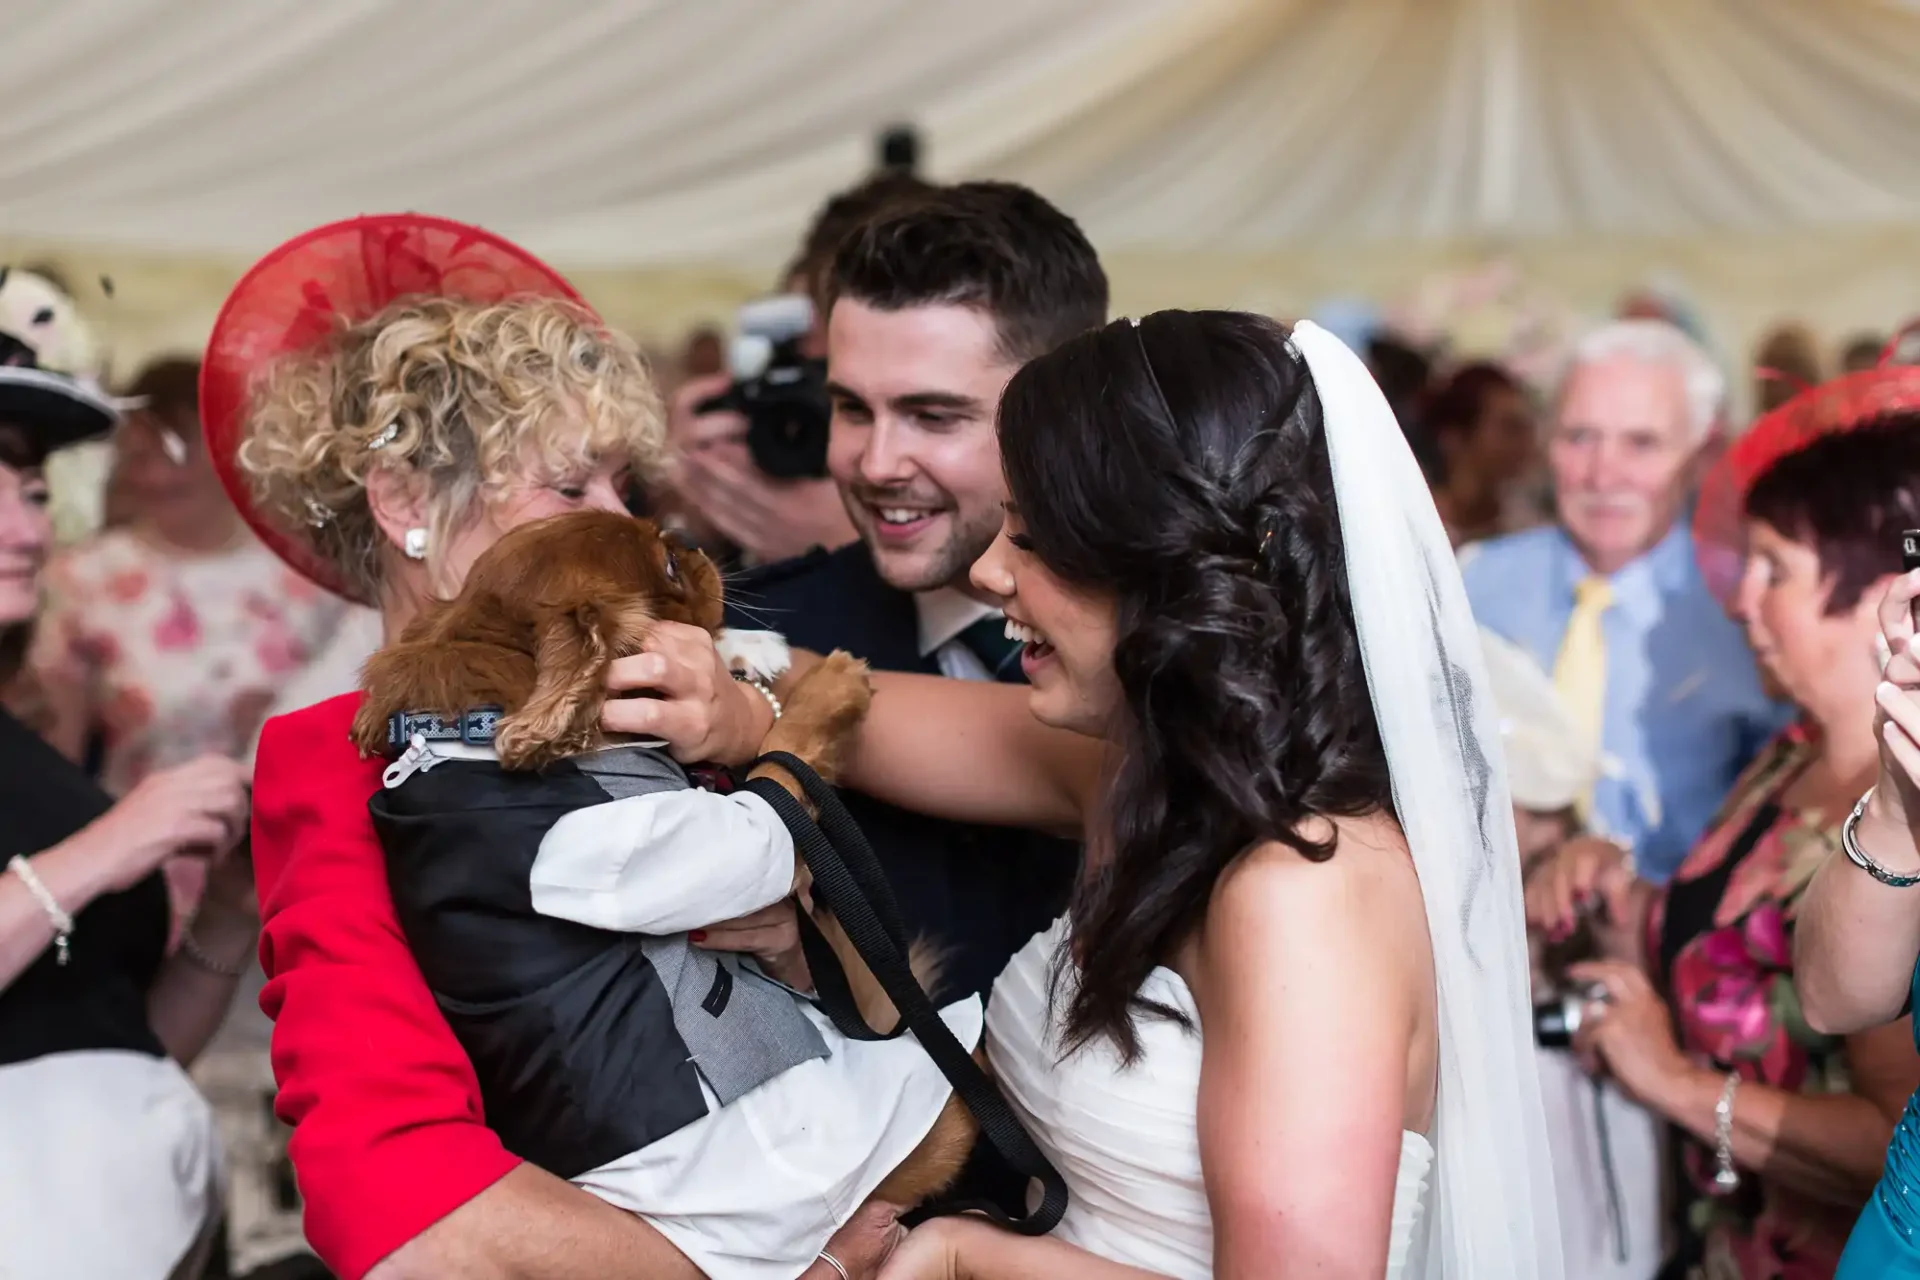 Bride and groom smiling and interacting with a small dog held by a guest at their wedding reception.